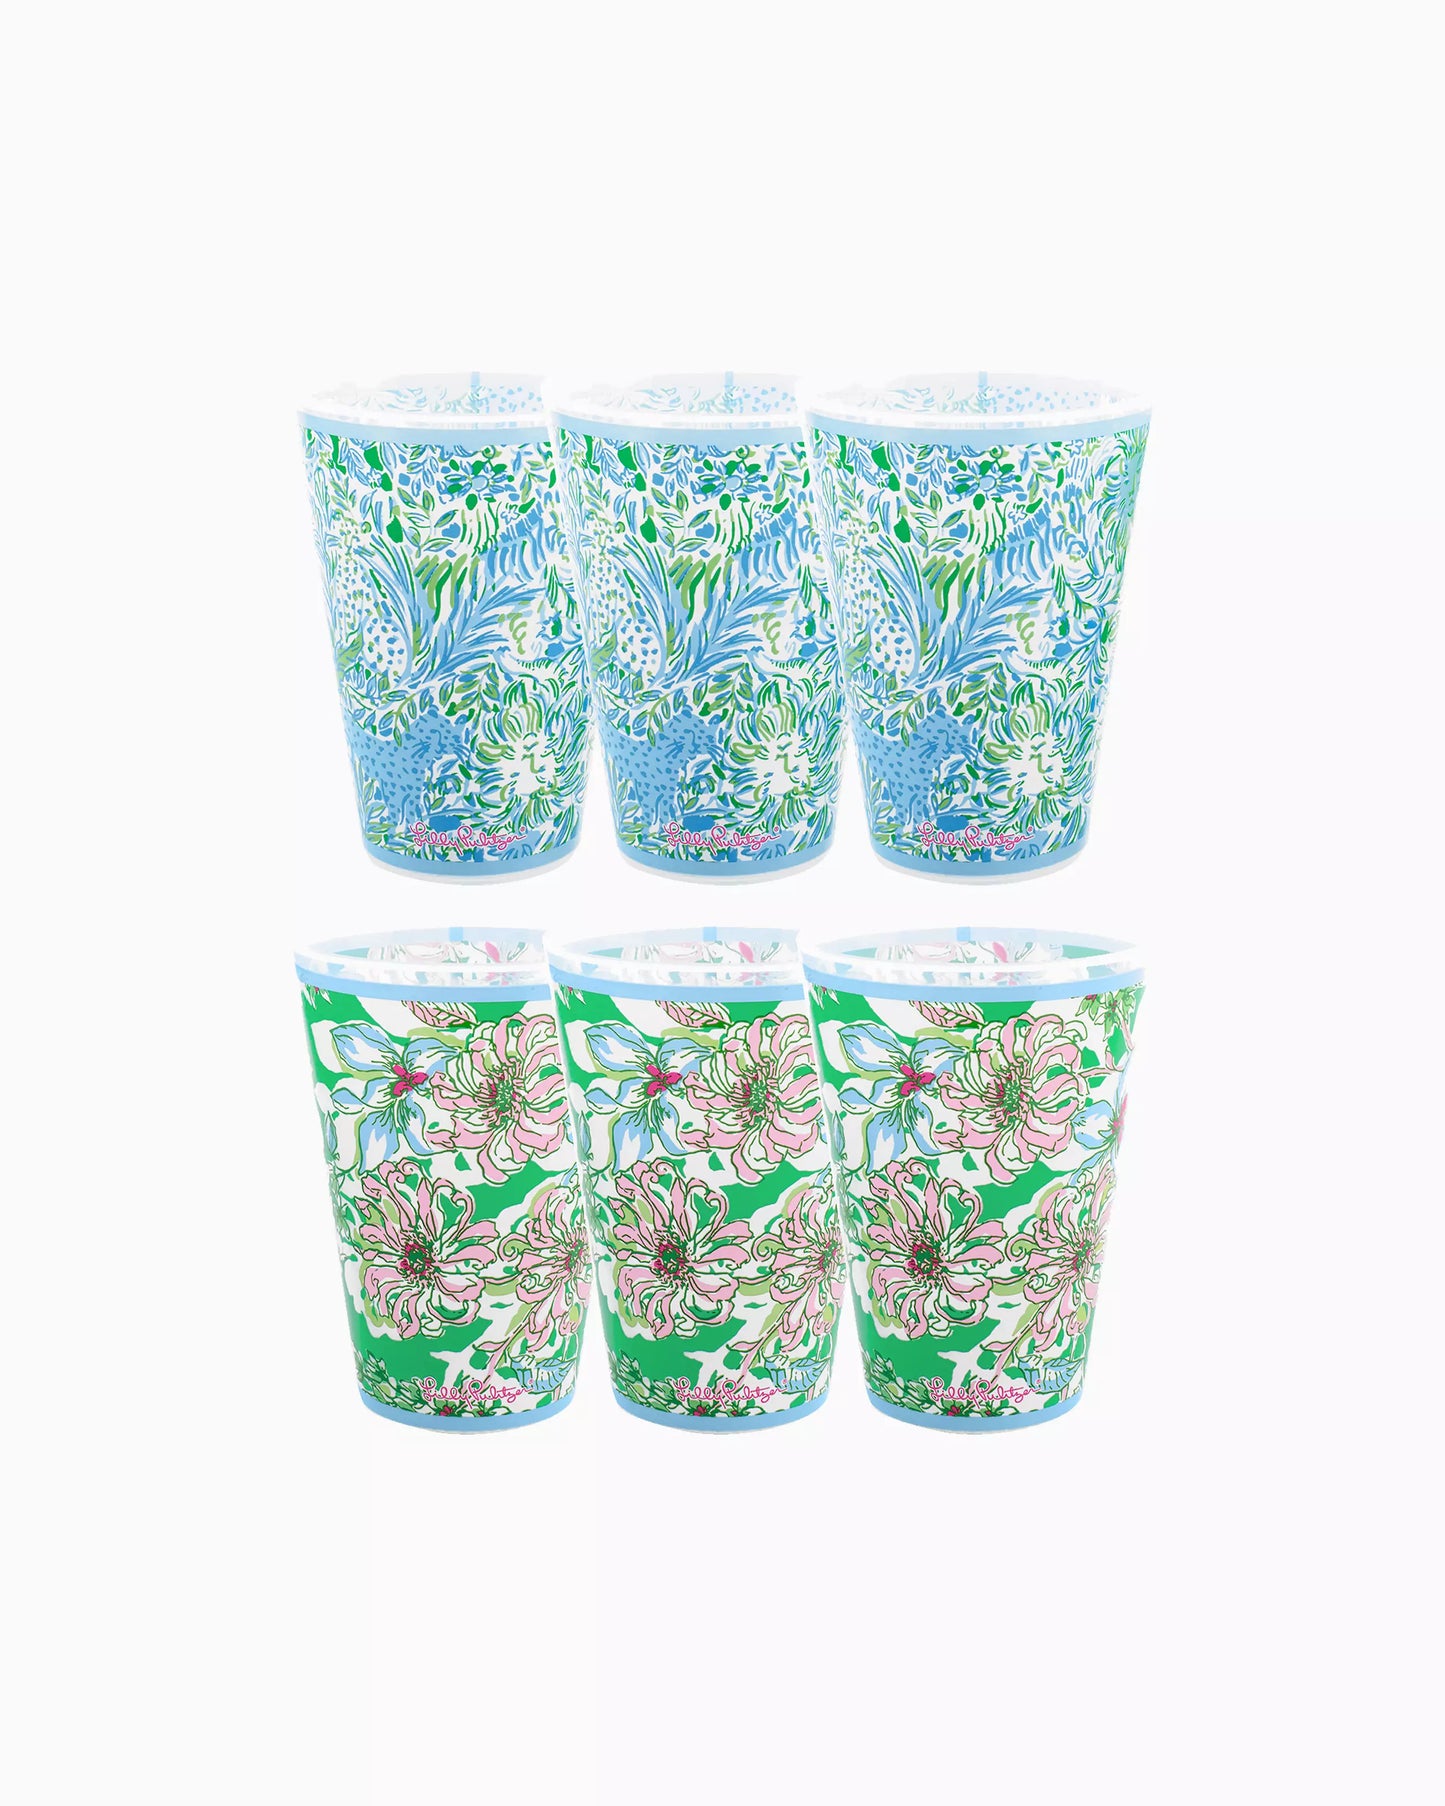 Lilly Pulitzer 14oz Cups- Set of 6- Featuring the vibrant Lilly patterns Blossom Views and Hydra Blue Dandy Lyons - Findlay Rowe Designs